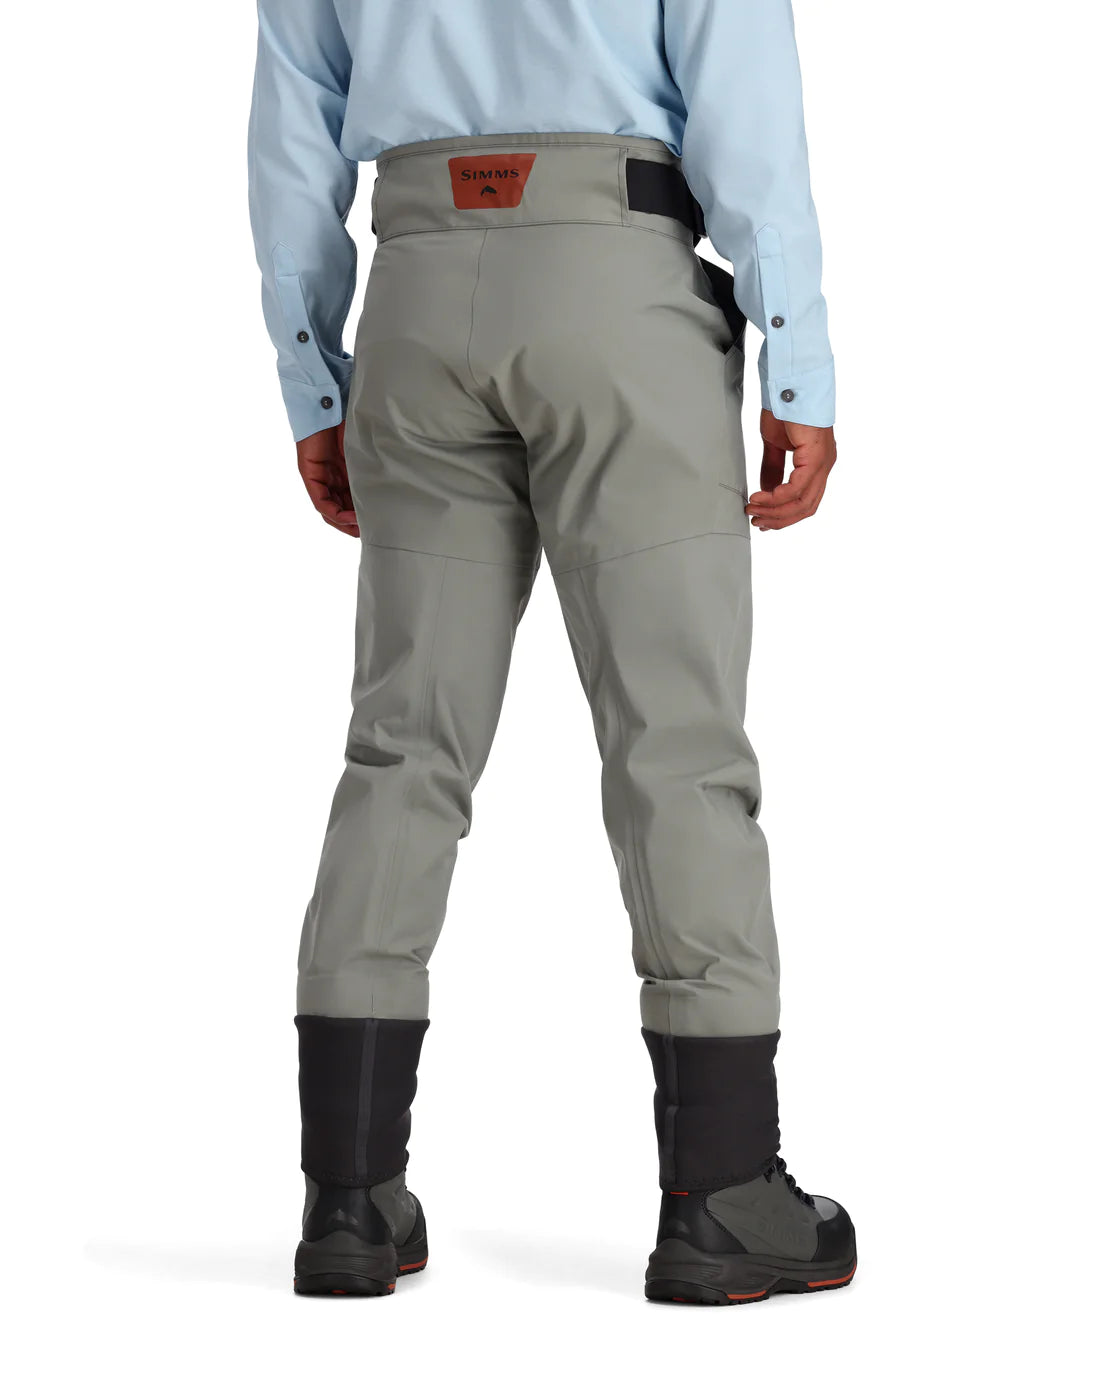 Simms Freestone Wading Pants -  - Mansfield Hunting & Fishing - Products to prepare for Corona Virus